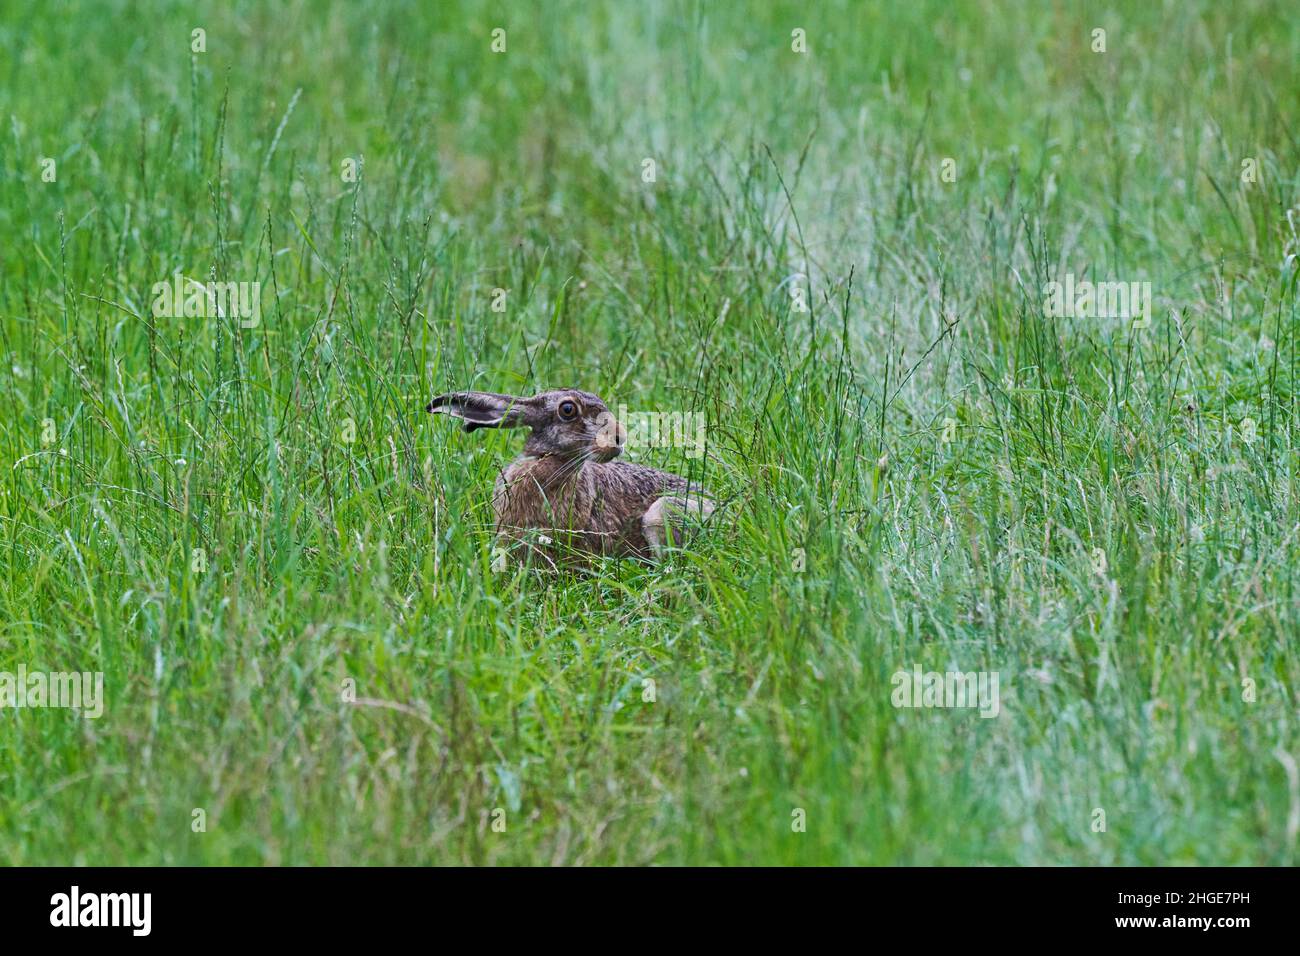 Hare or jackrabbit, leporids belonging to the genus Lepus. They are classified in the same family as rabbits. Stock Photo